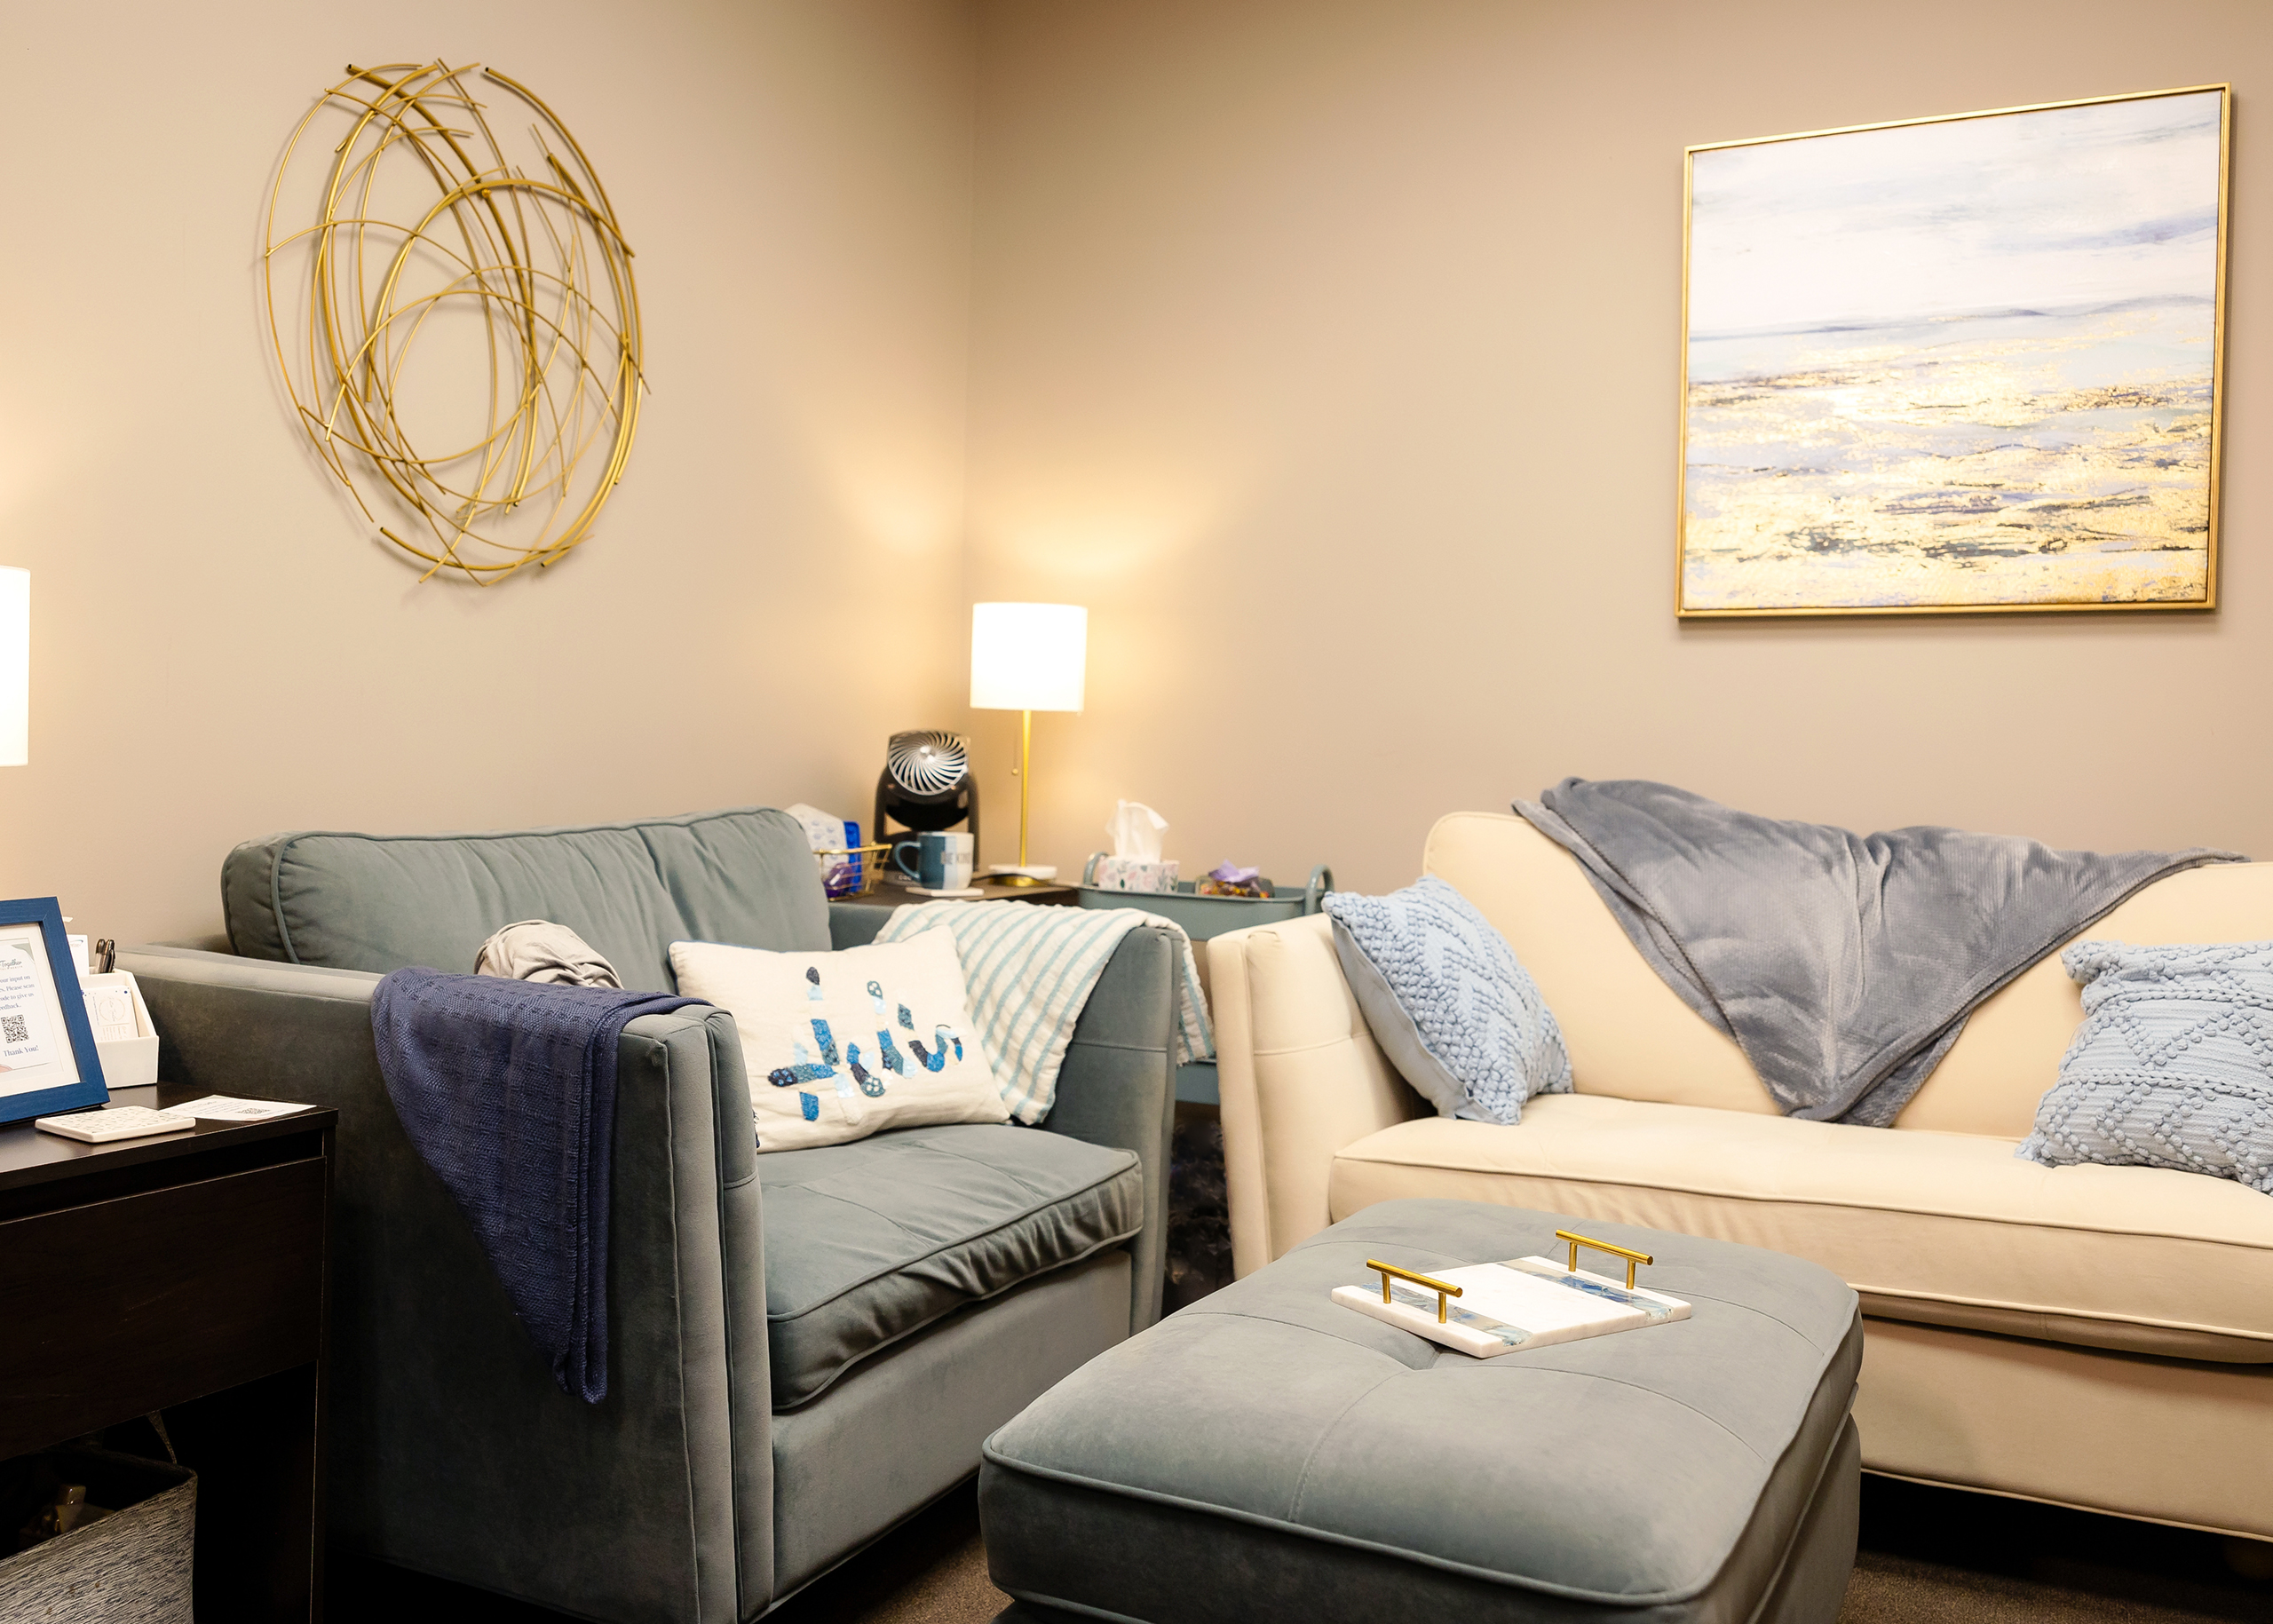 Soft couches with pillows and throw blankets are warm, offering comfort in a well, but softly lit space. Neutral beige walls and simple art tastfully decorates the walls. 